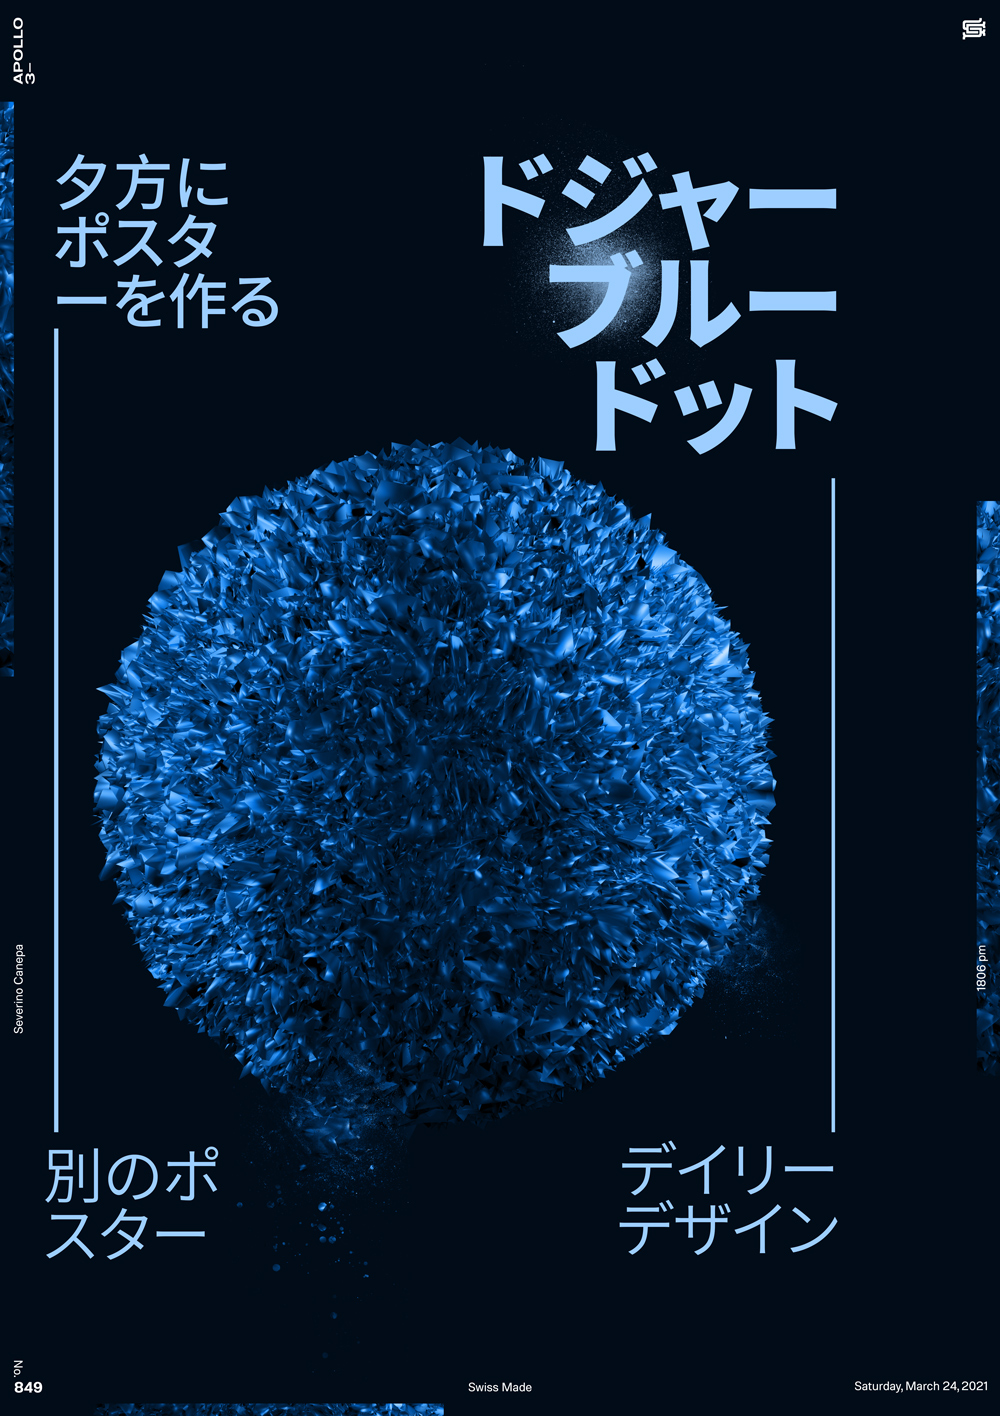 Visual art made with Blender and Photoshop with Japanese Typeface